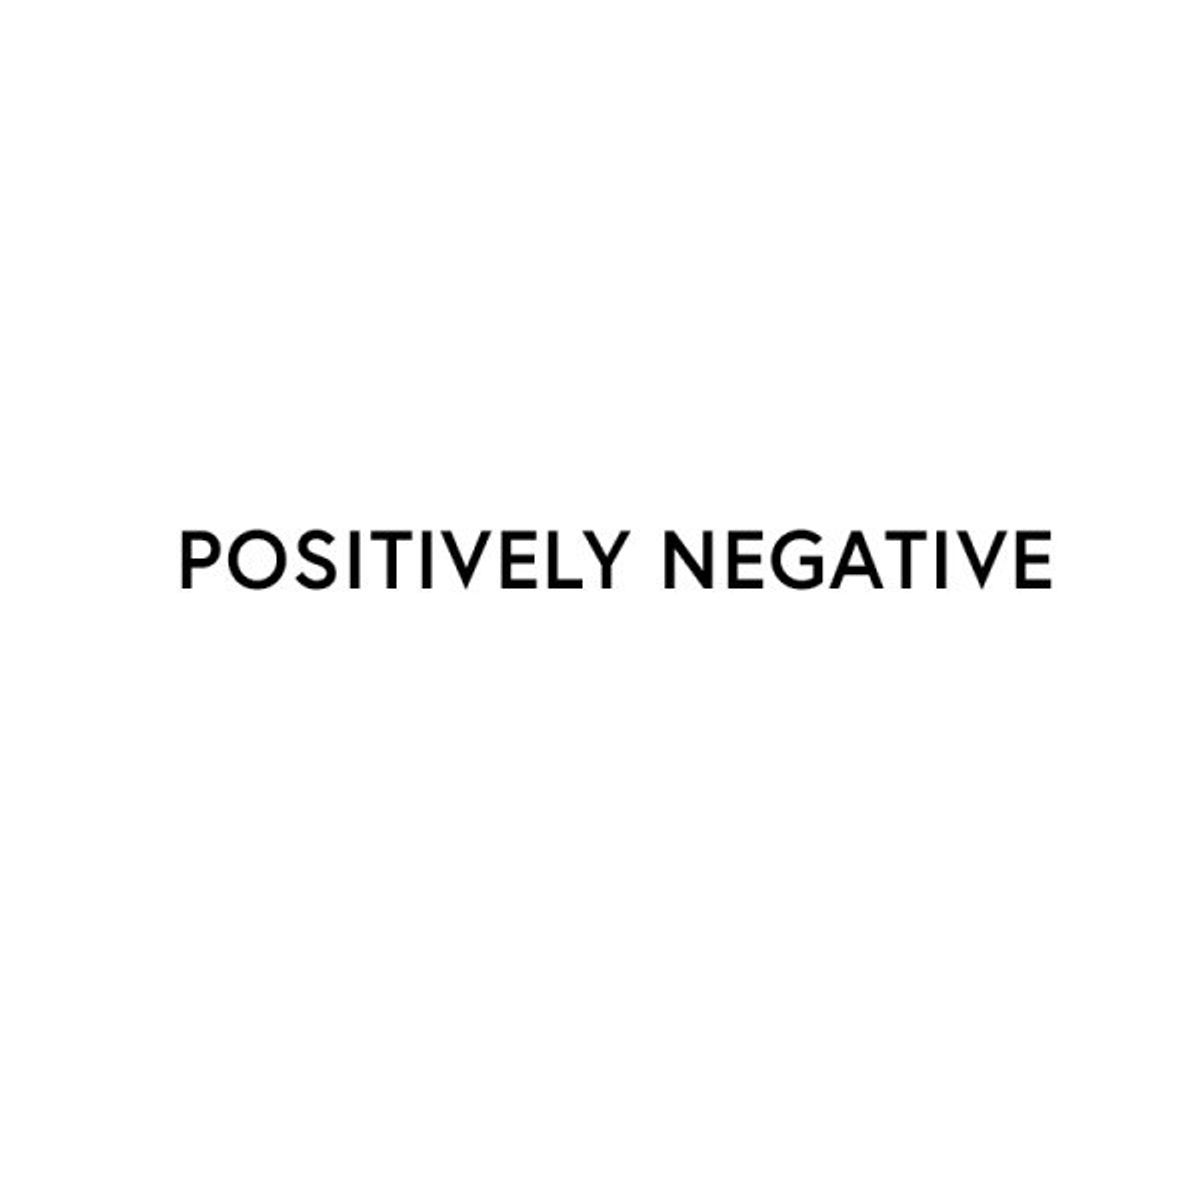 I'm a Negative Person, and Proud of it